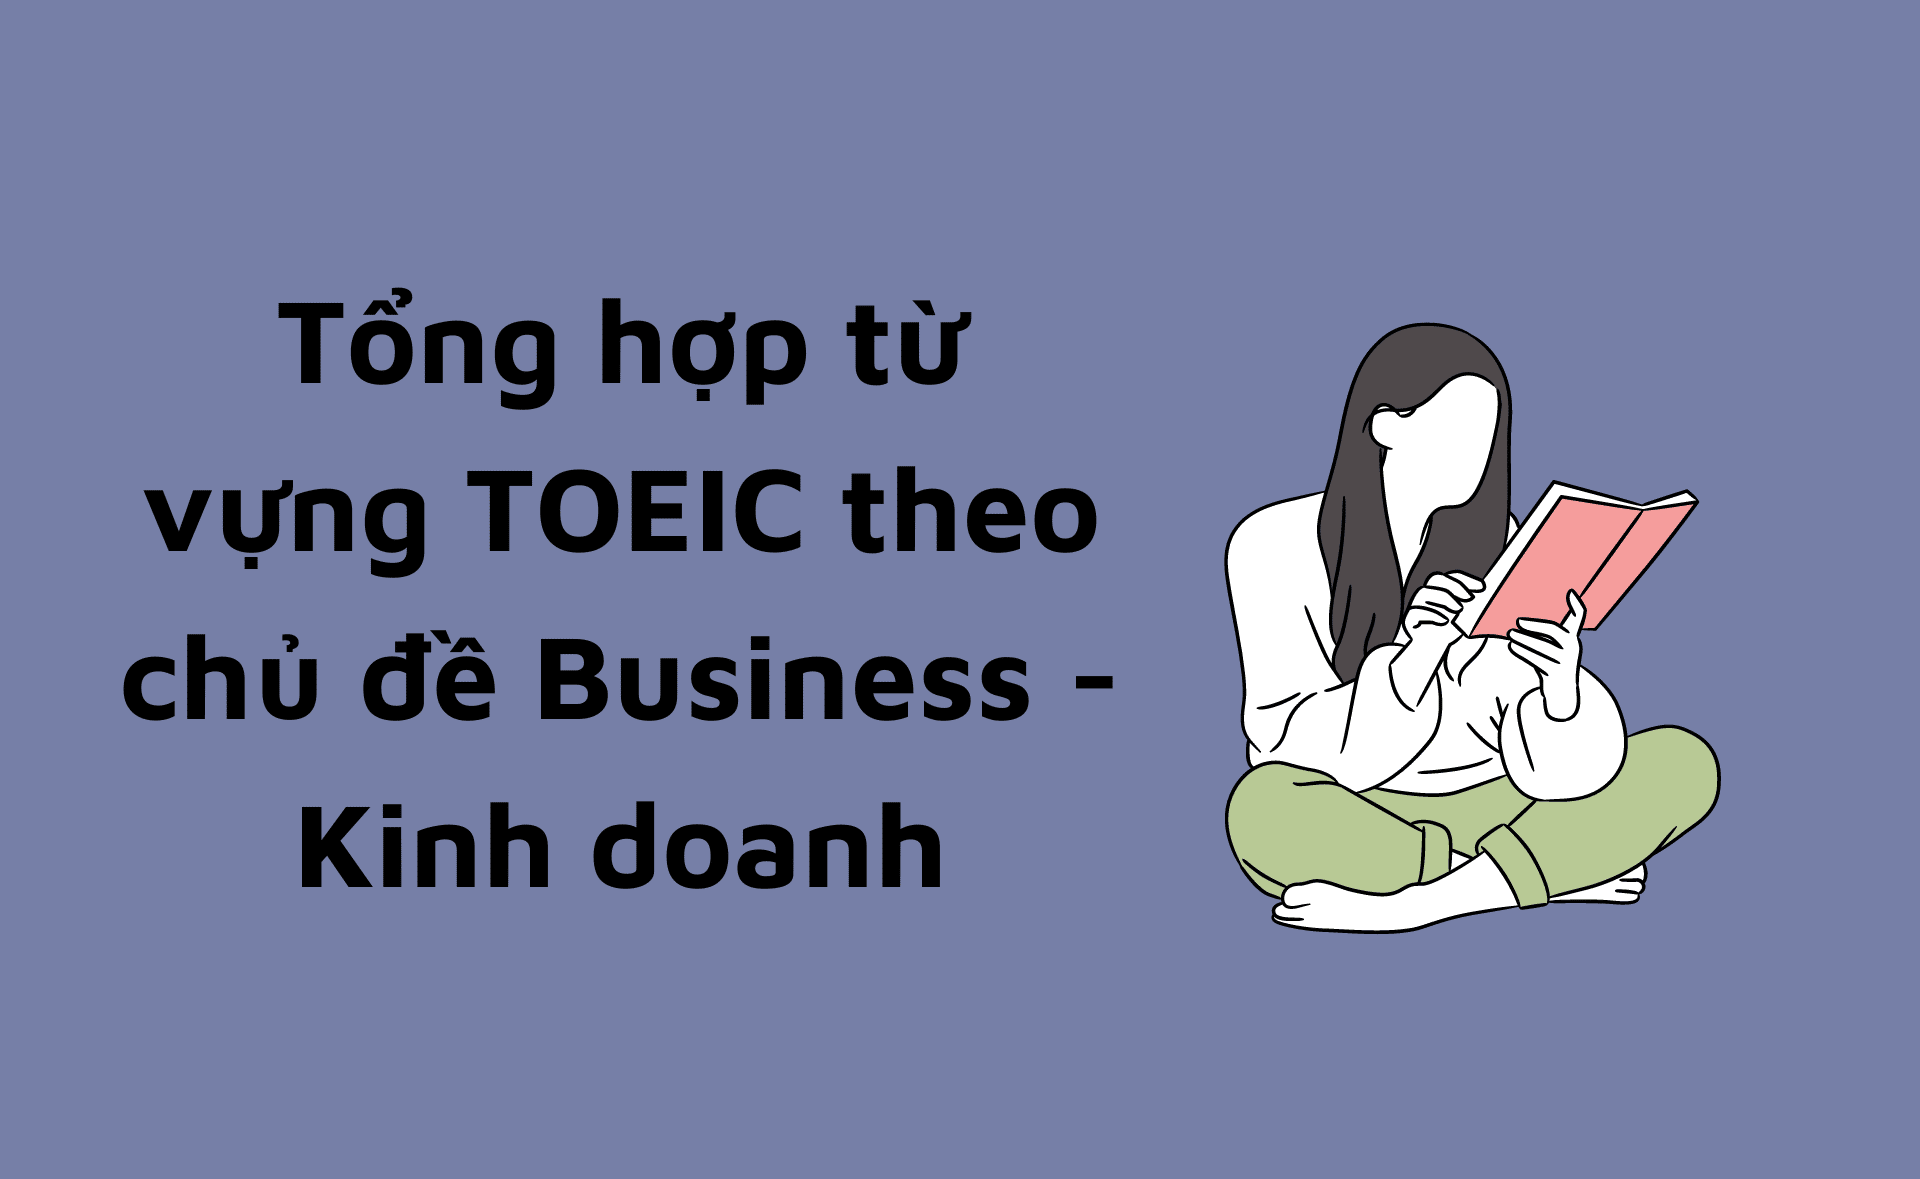 TOEIC theo chủ đề Business